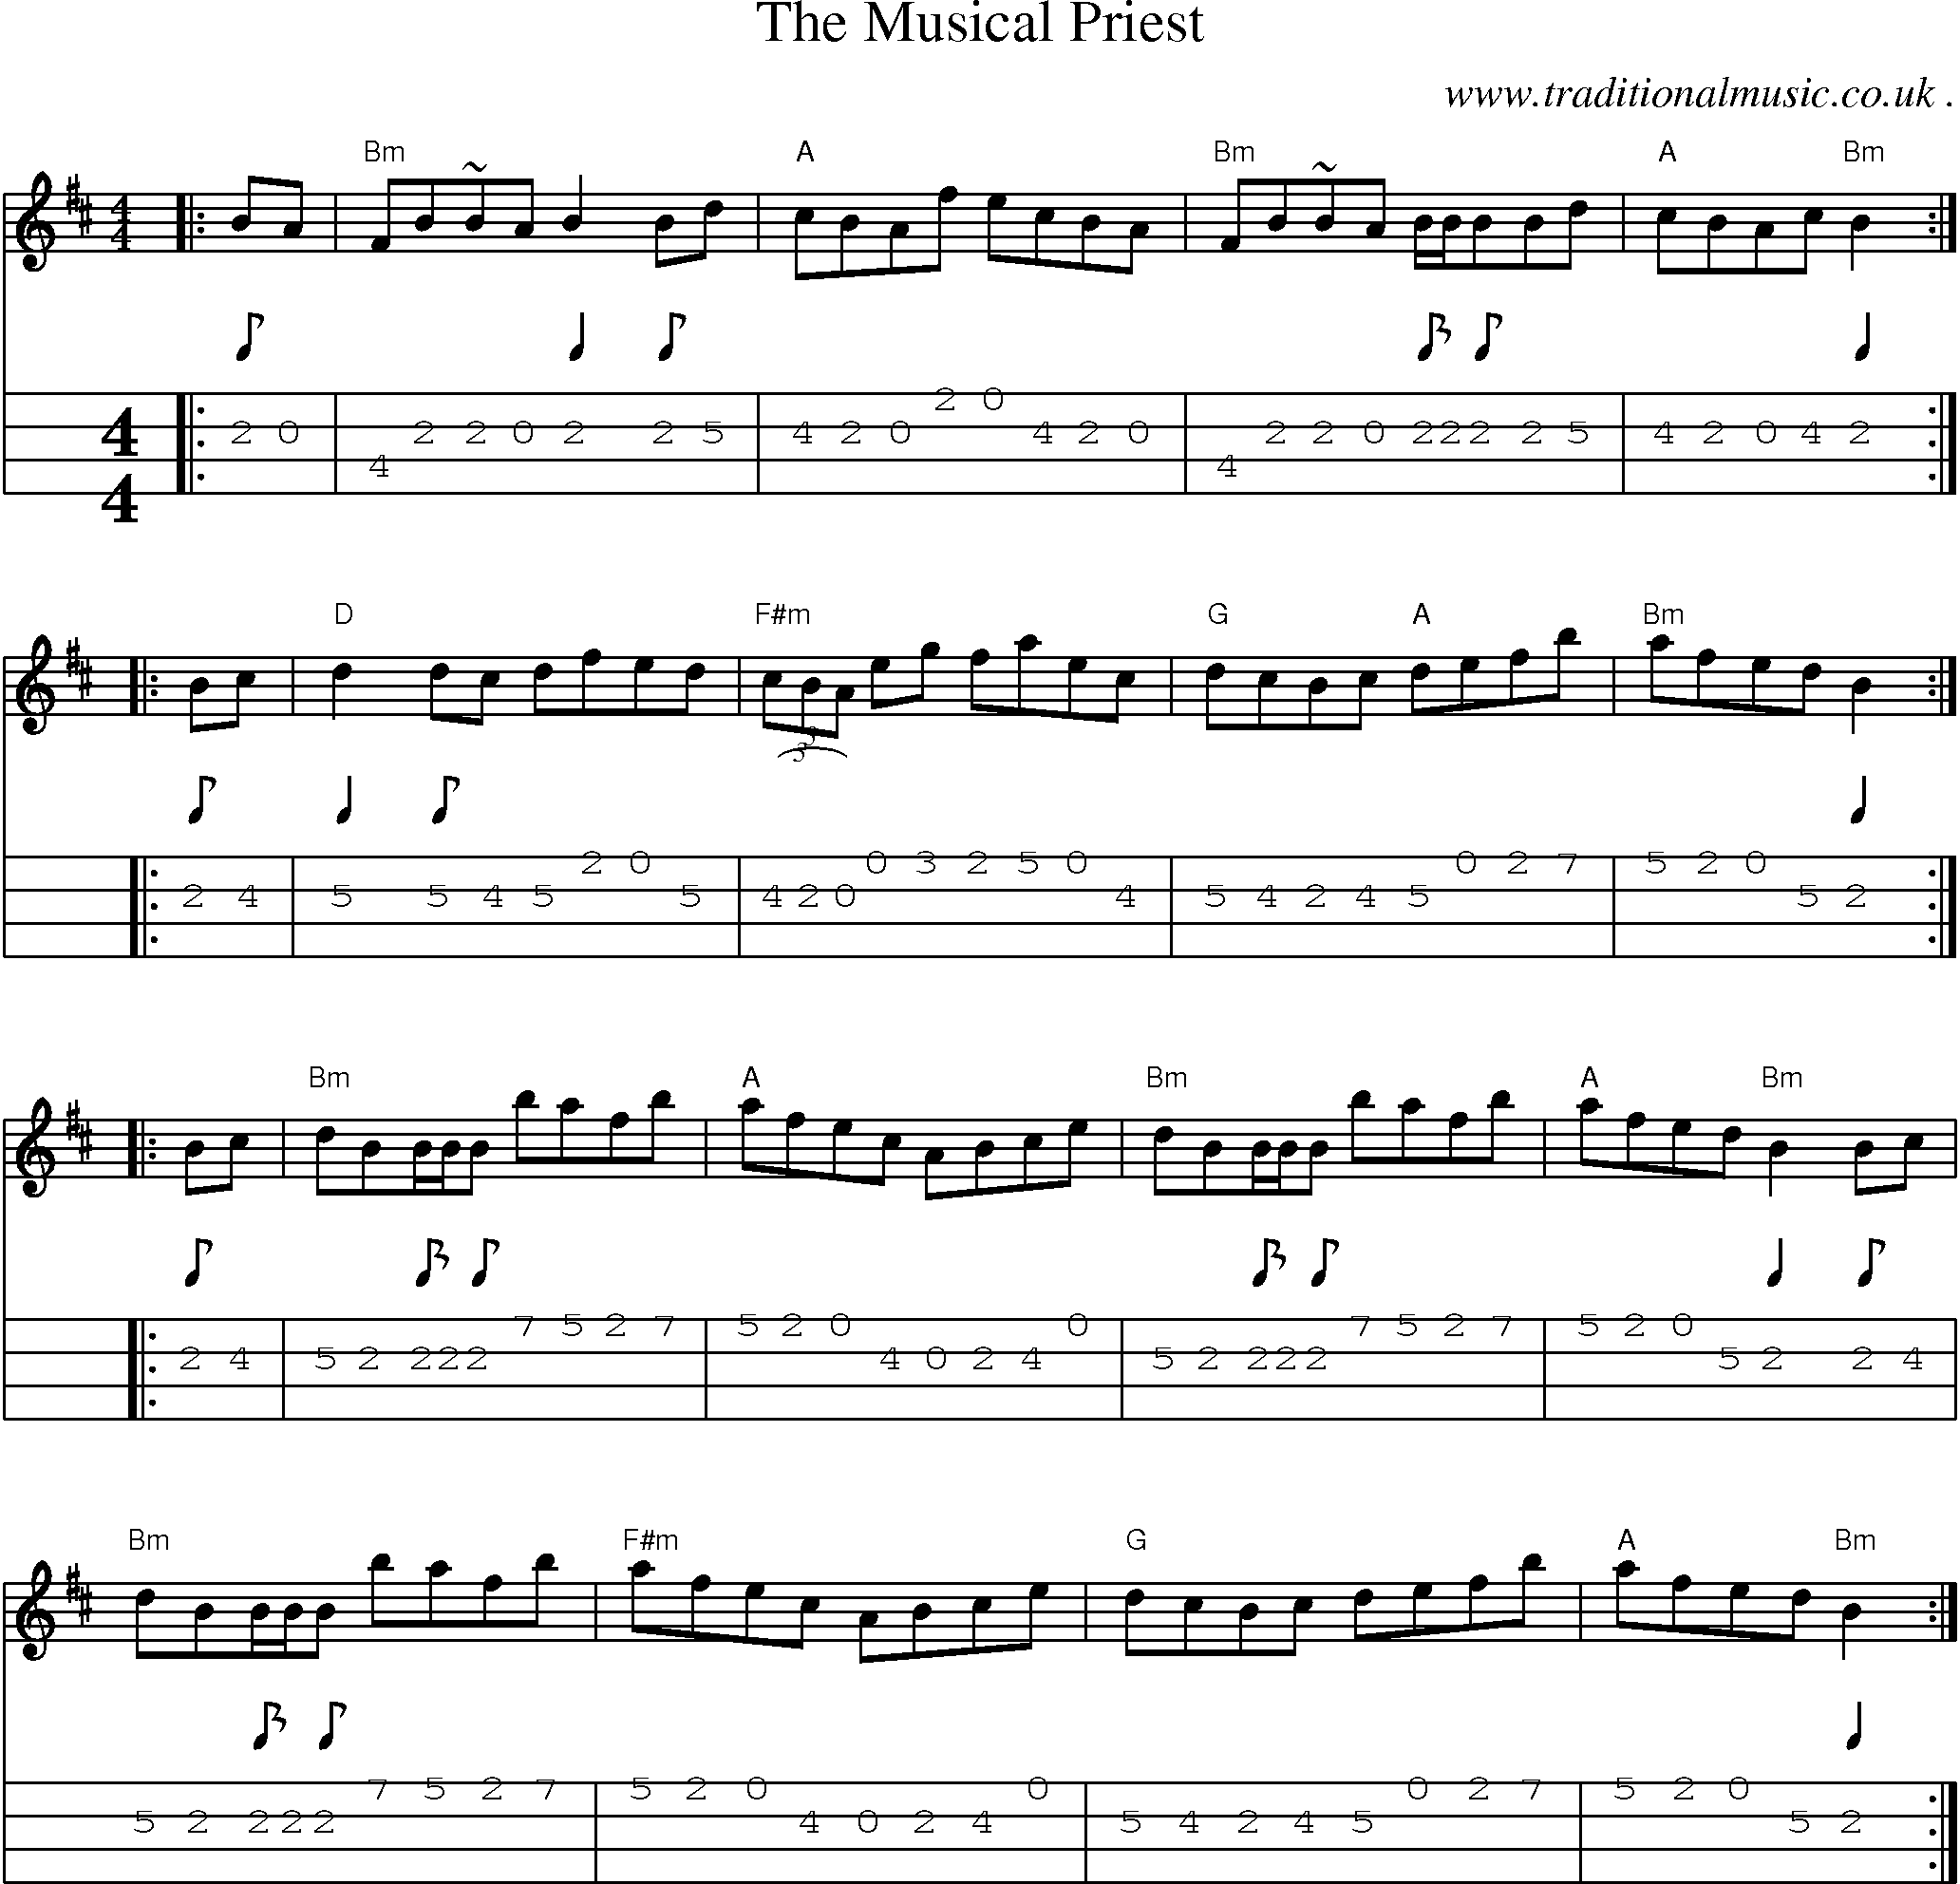 Music Score and Guitar Tabs for The Musical Priest